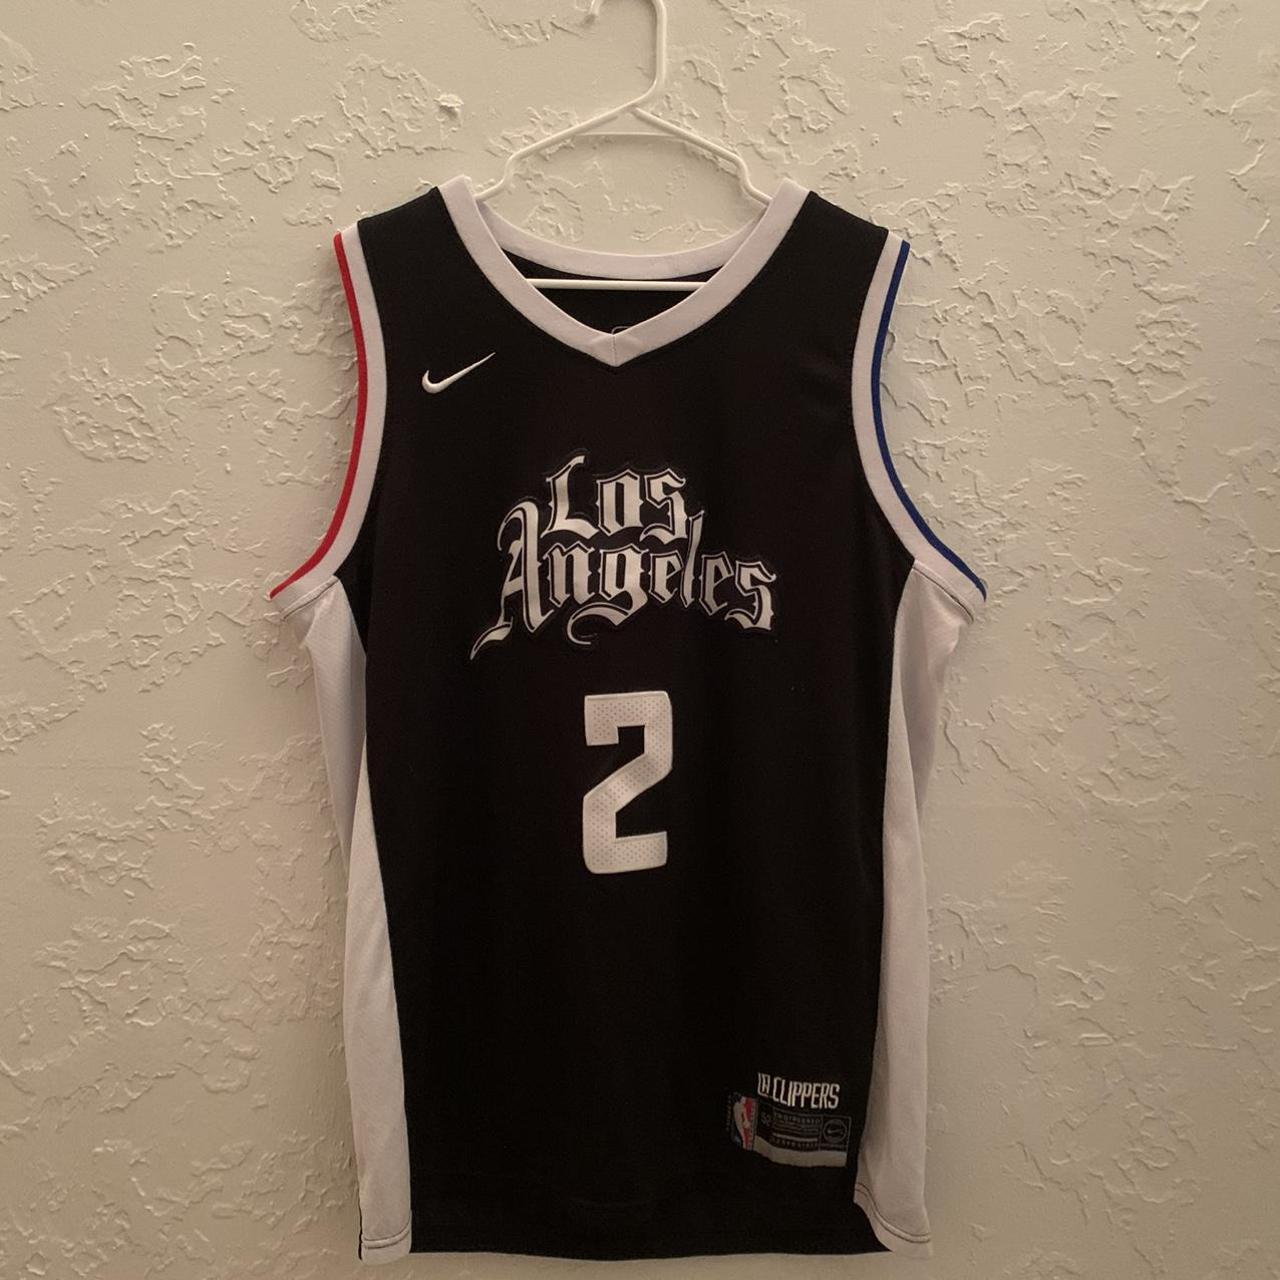 la clippers city edition jersey 2021